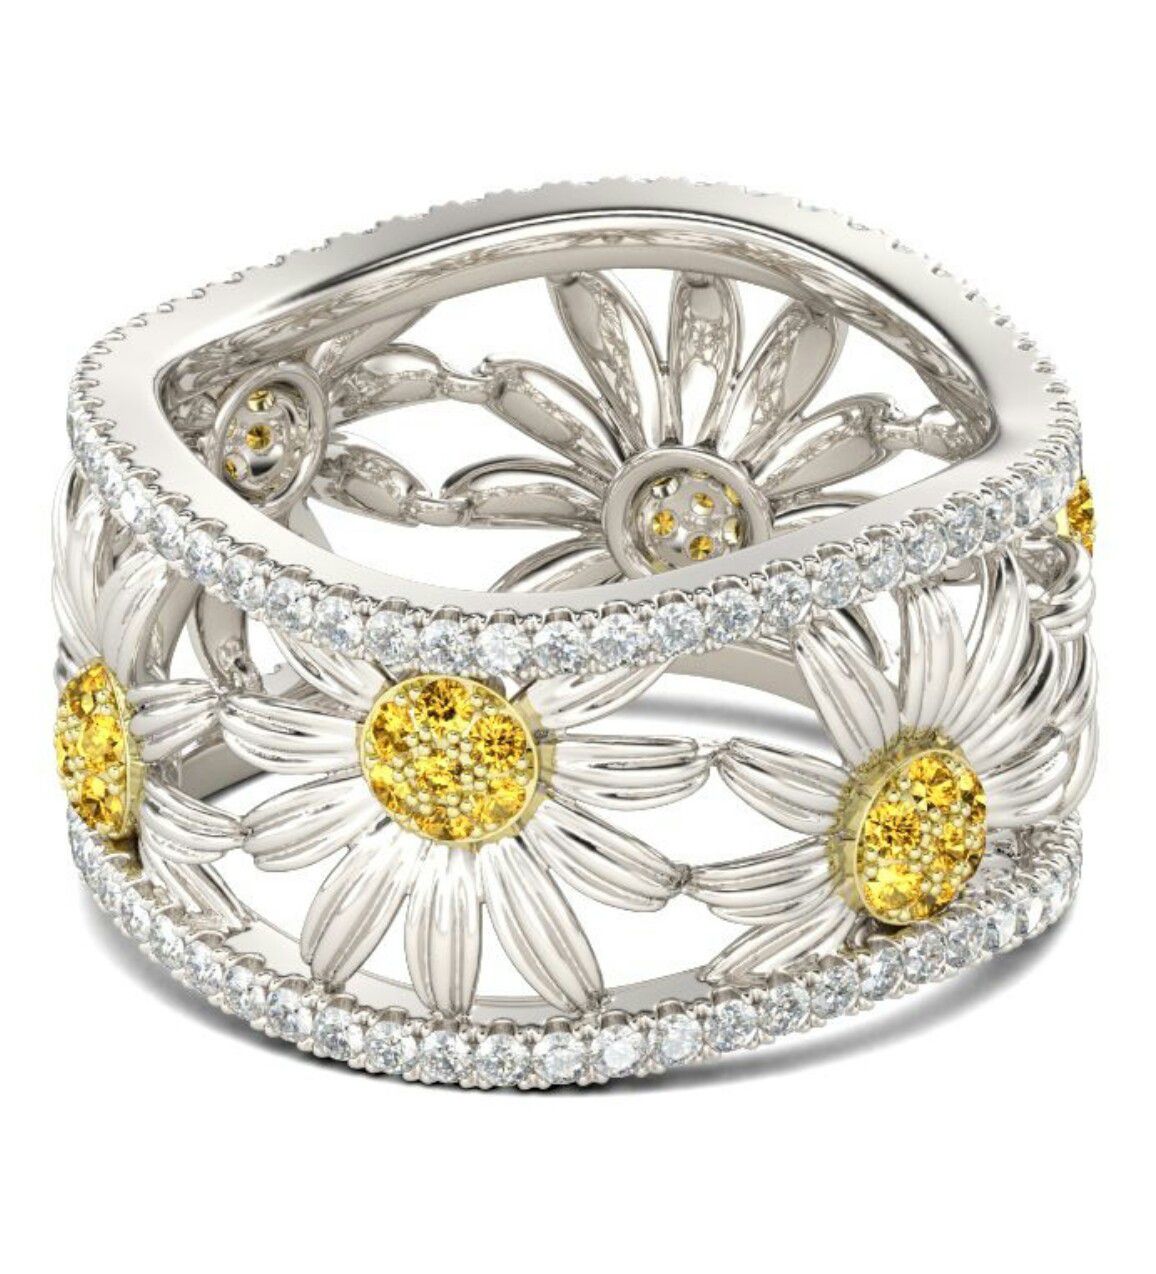 DAISY STERLING SILVER WOMEN'S BAND